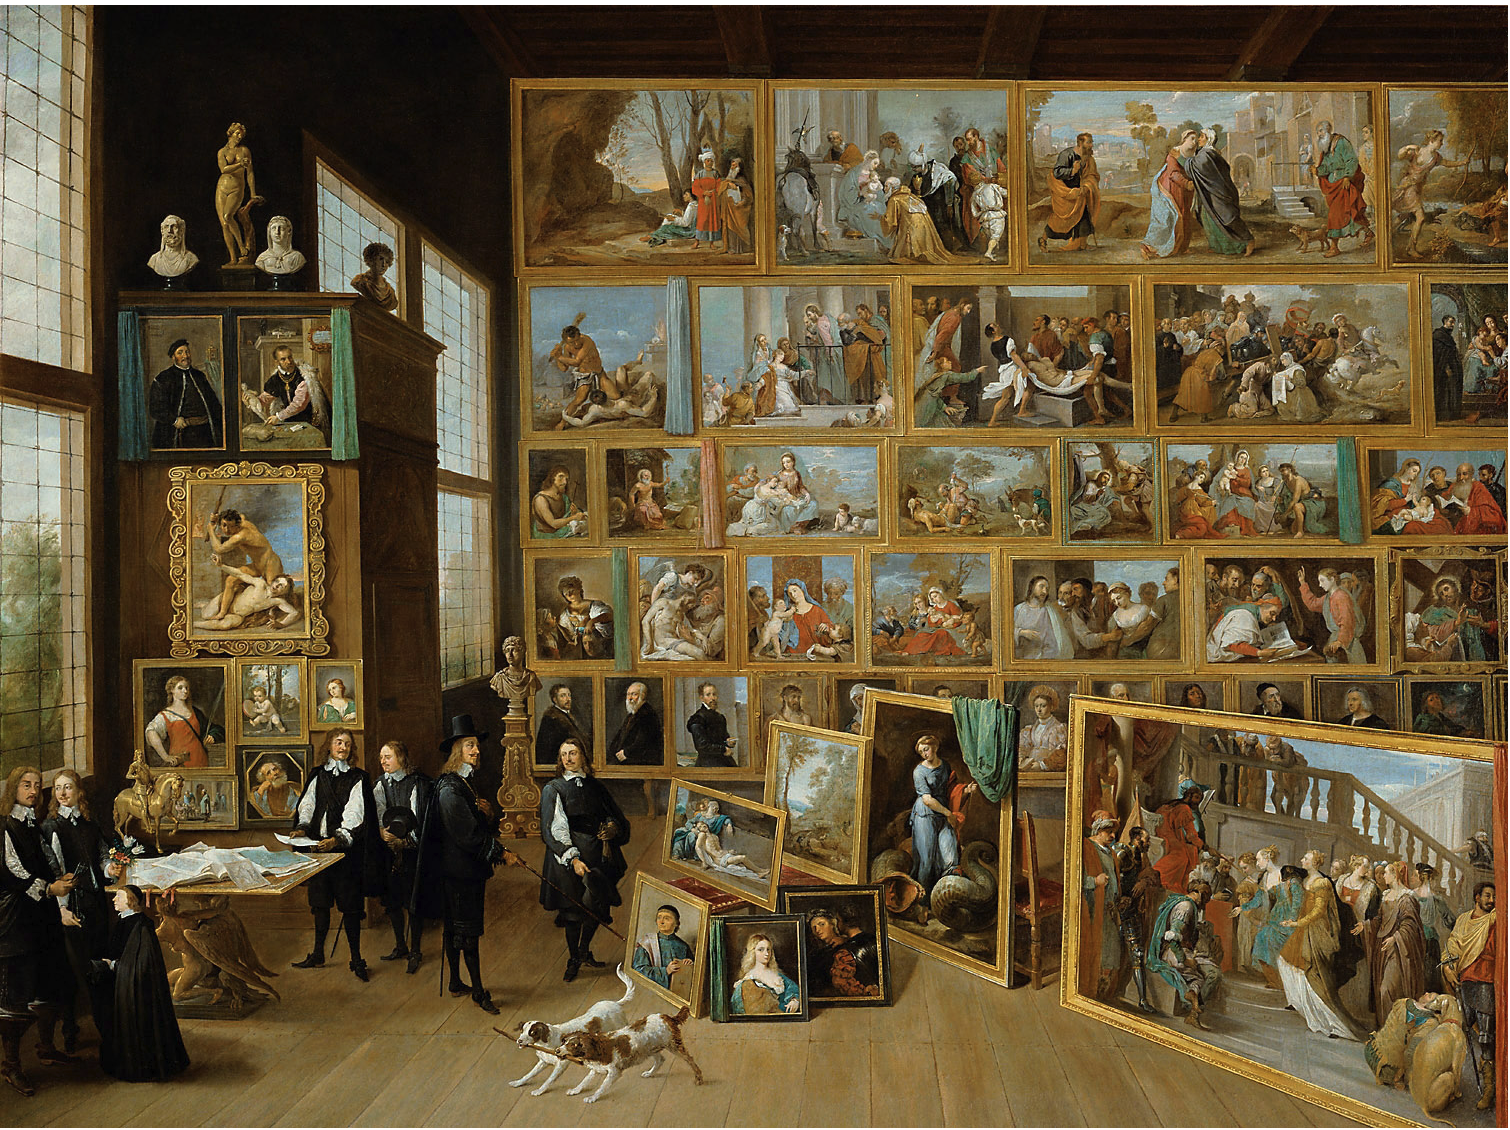 Before moving to Vienna in 1659, Archduke Leopold Wilhelm formed his art collection in Brussels, where Teniers painted views of the most prized possessions in Leopold